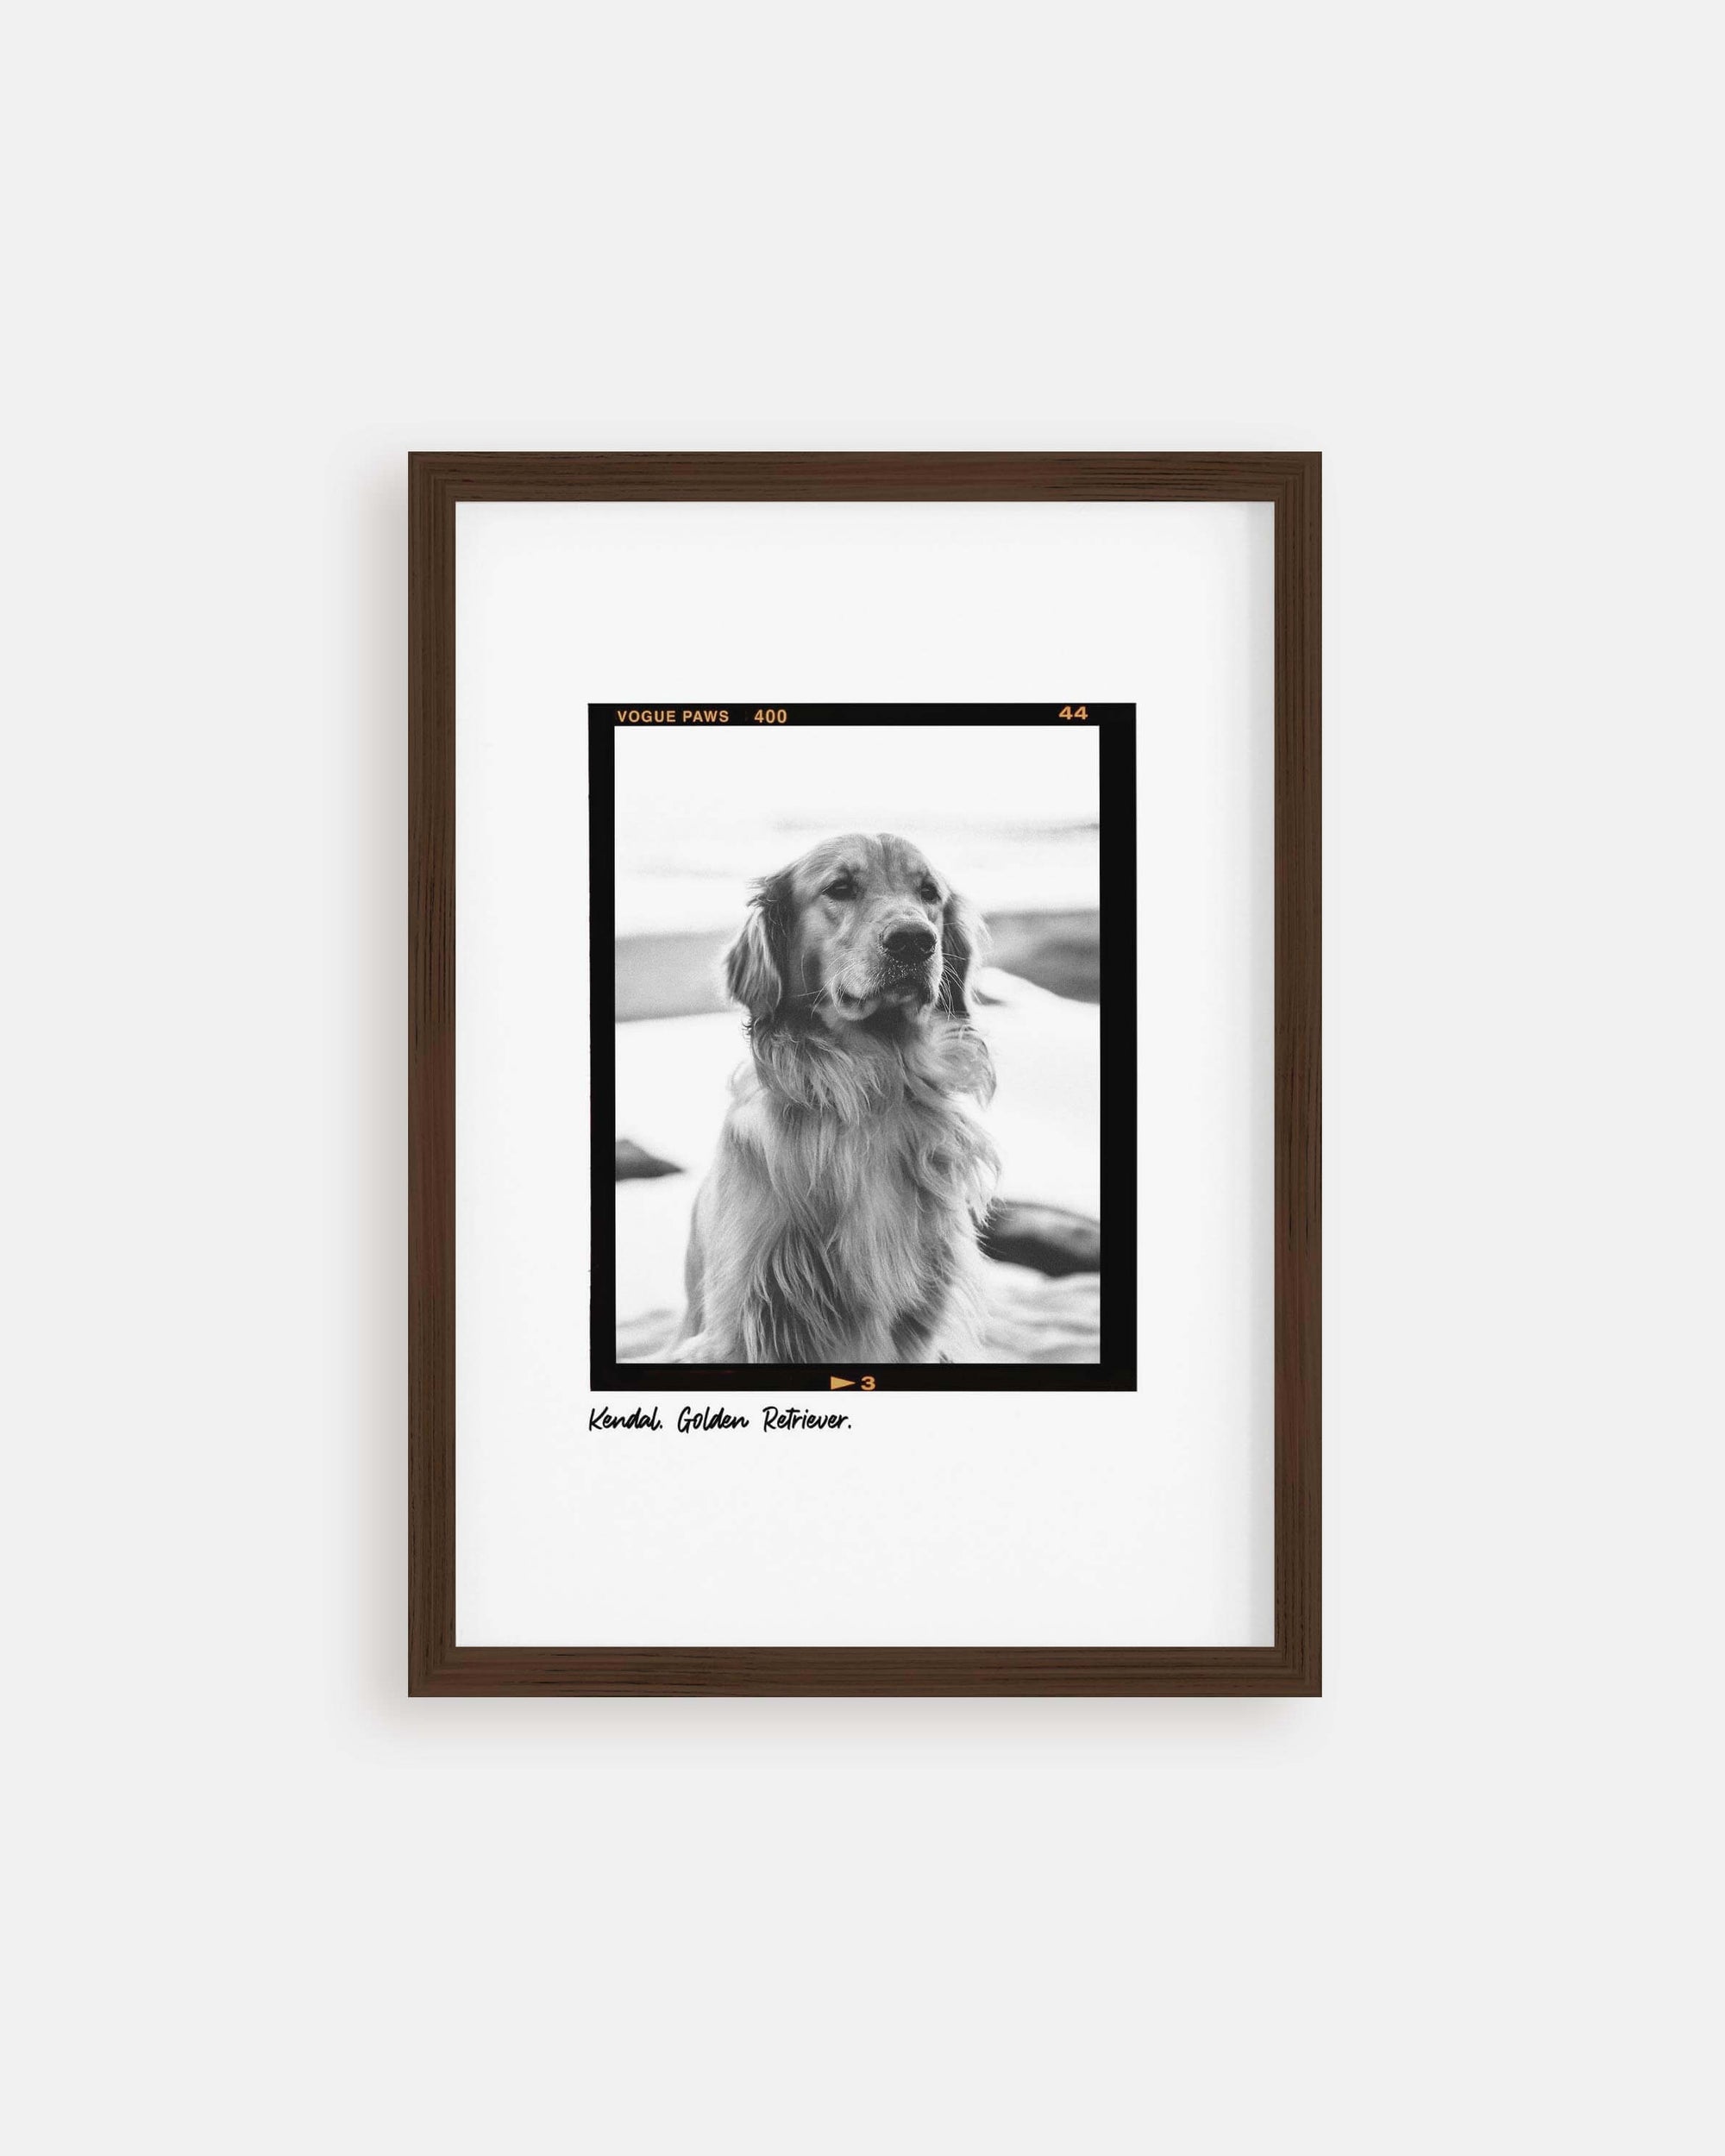 Black and white art dog photo custom fine art pet portrait in film negative vintage art style made by vogue paws creators of the best pet portrait art gifts for dog mom and dog dad pet parents and pet lovers or sympathy gift pet memorial ideas